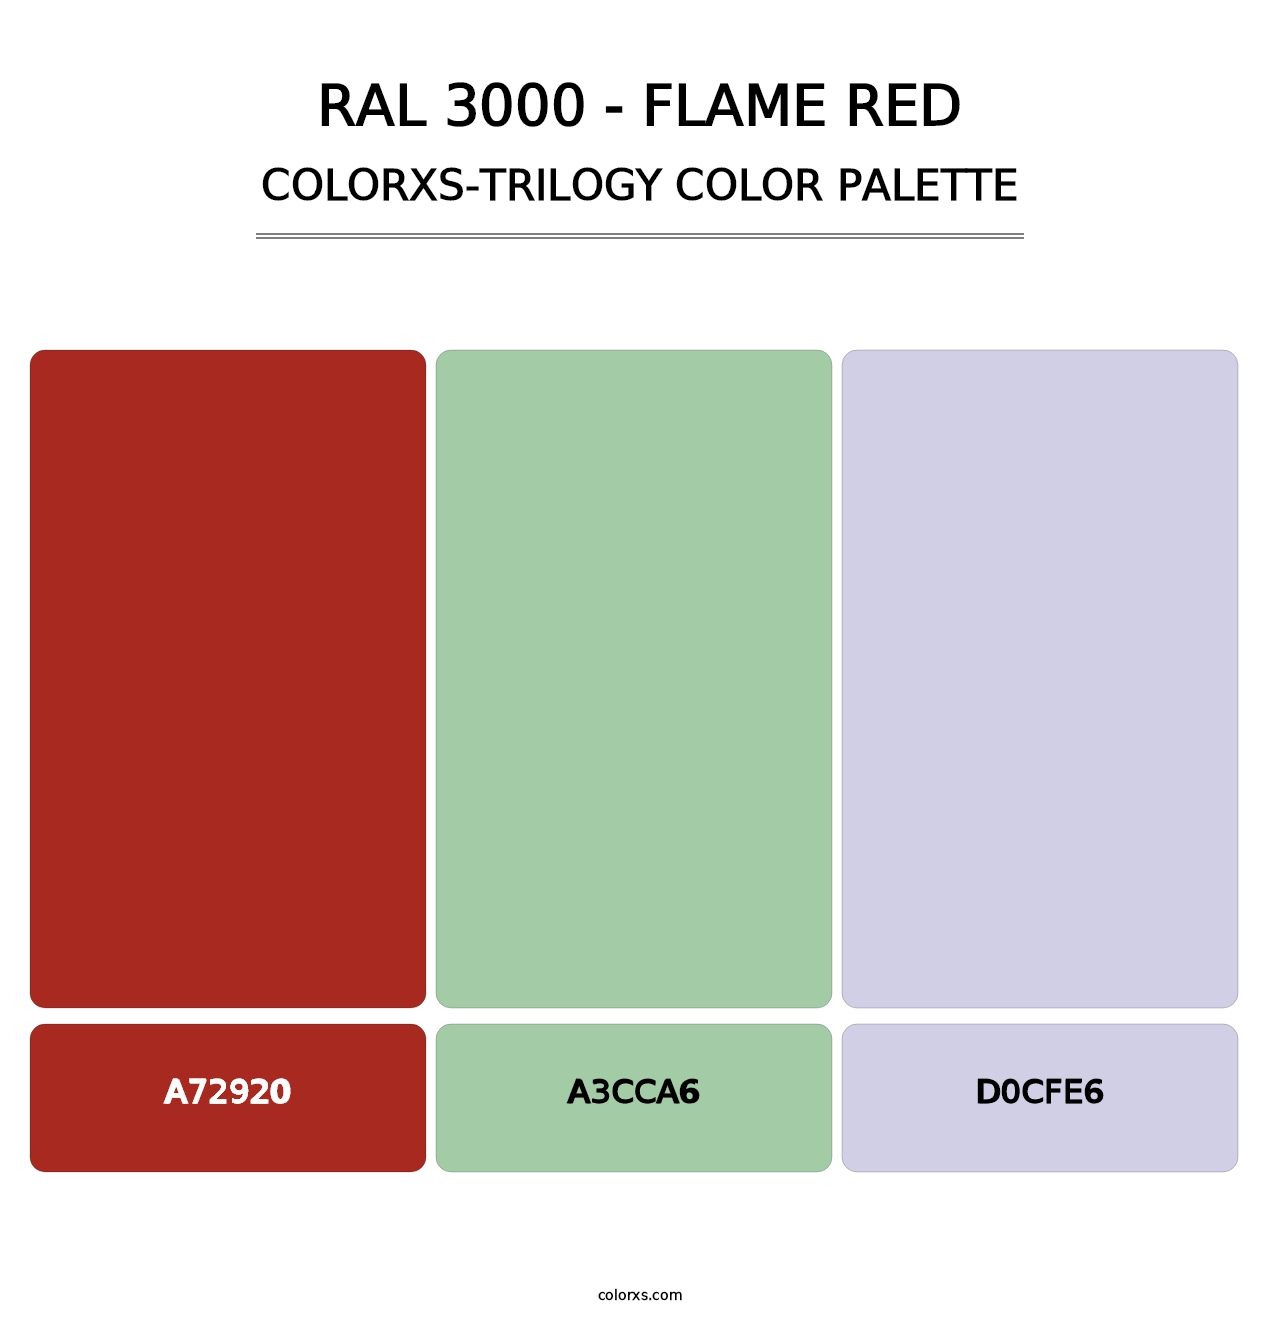 RAL 3000 - Flame Red - Colorxs Trilogy Palette